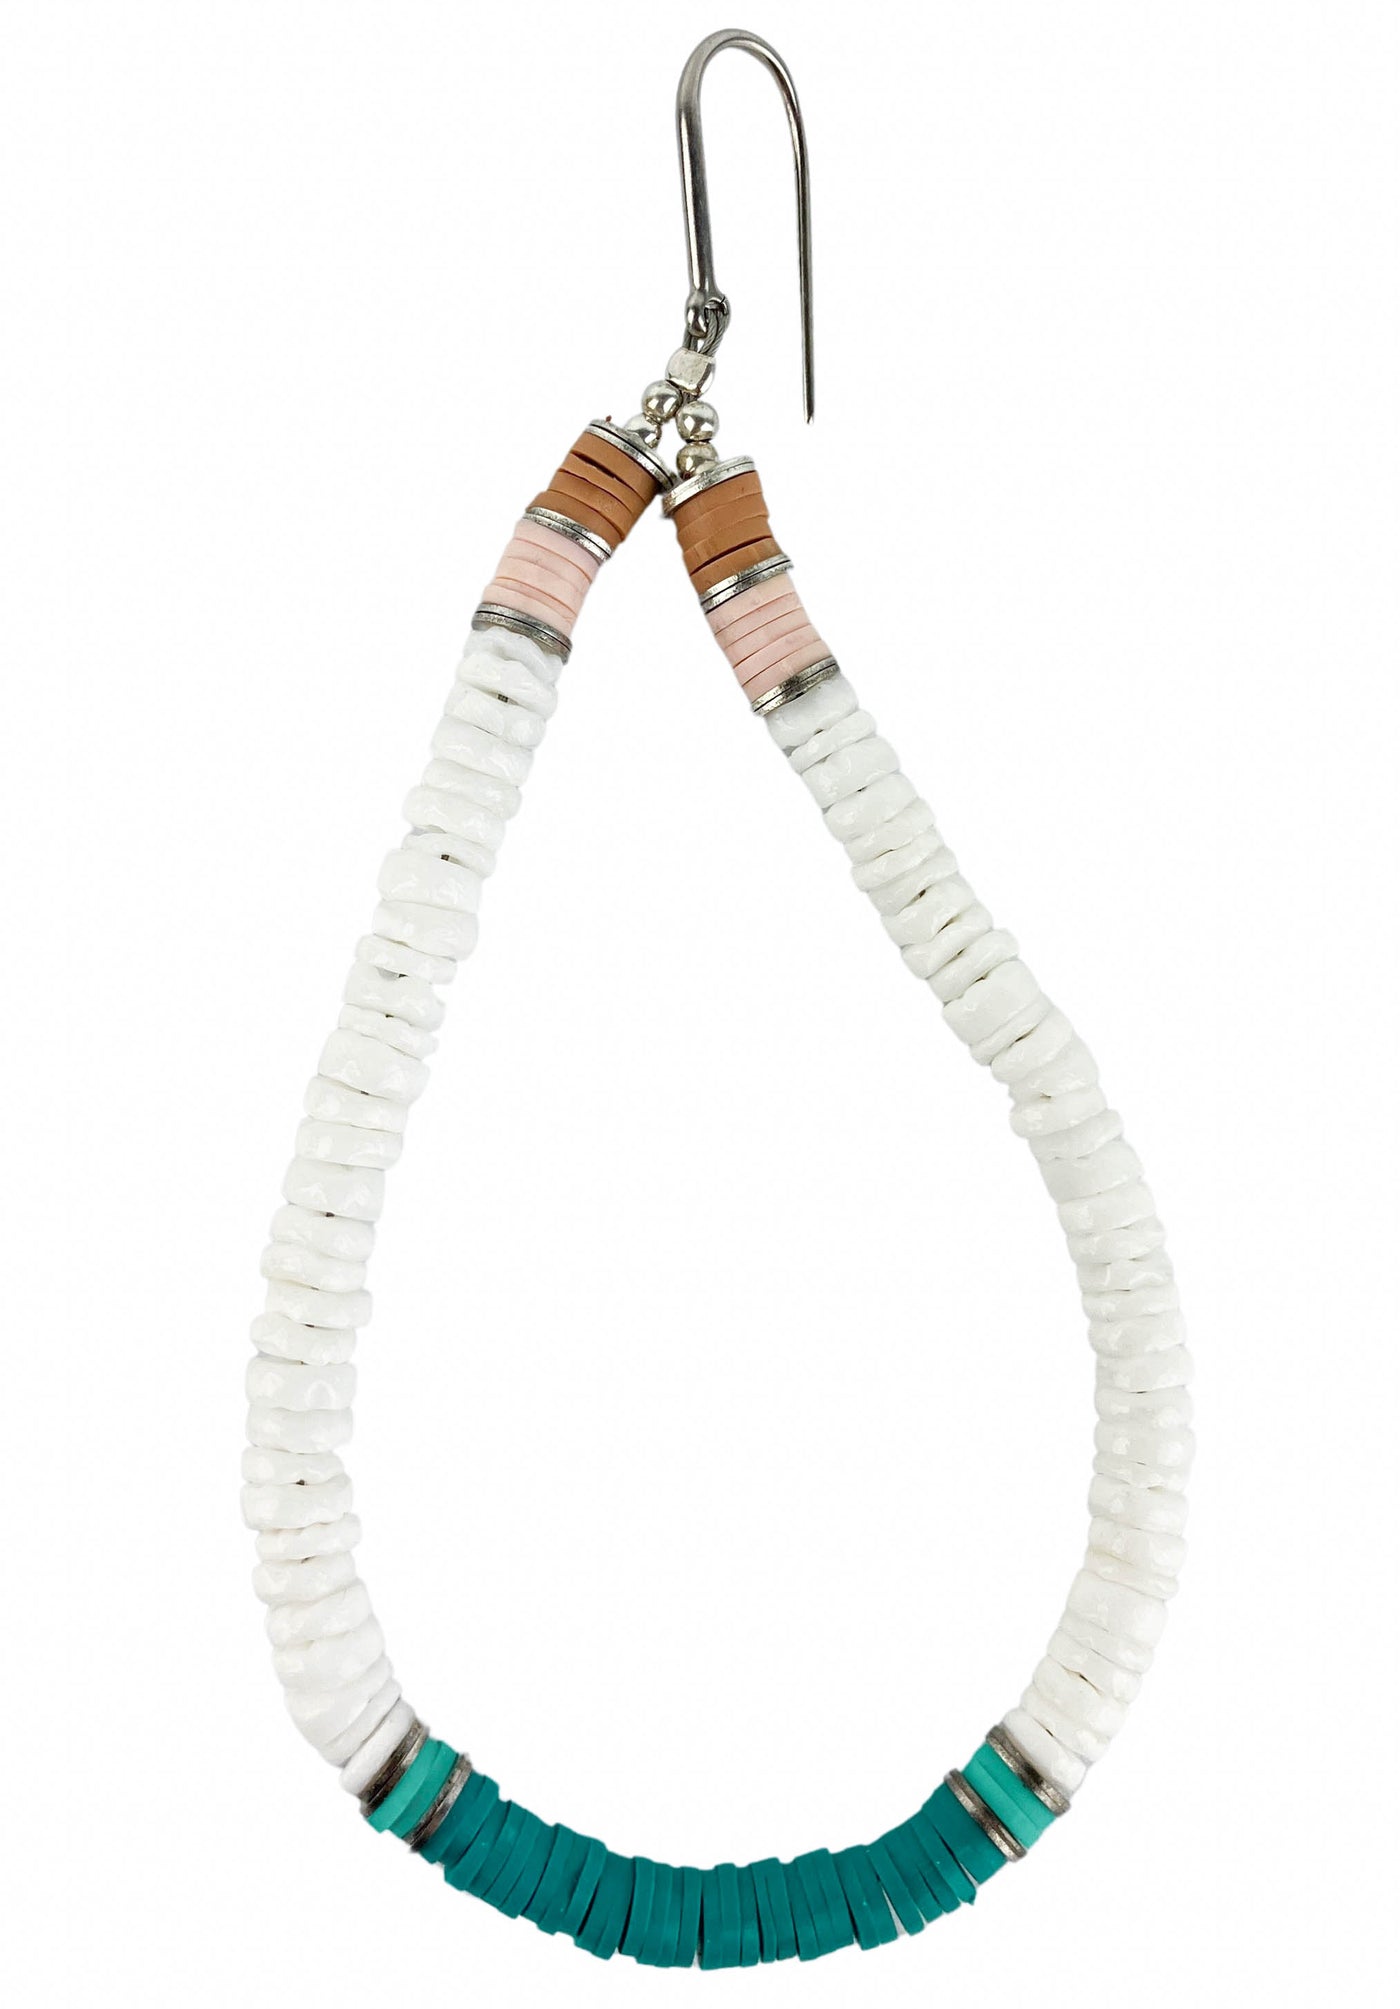 Isabel Marant Teardrop Earrings in White/Green - Discounts on Isabel Marant at UAL